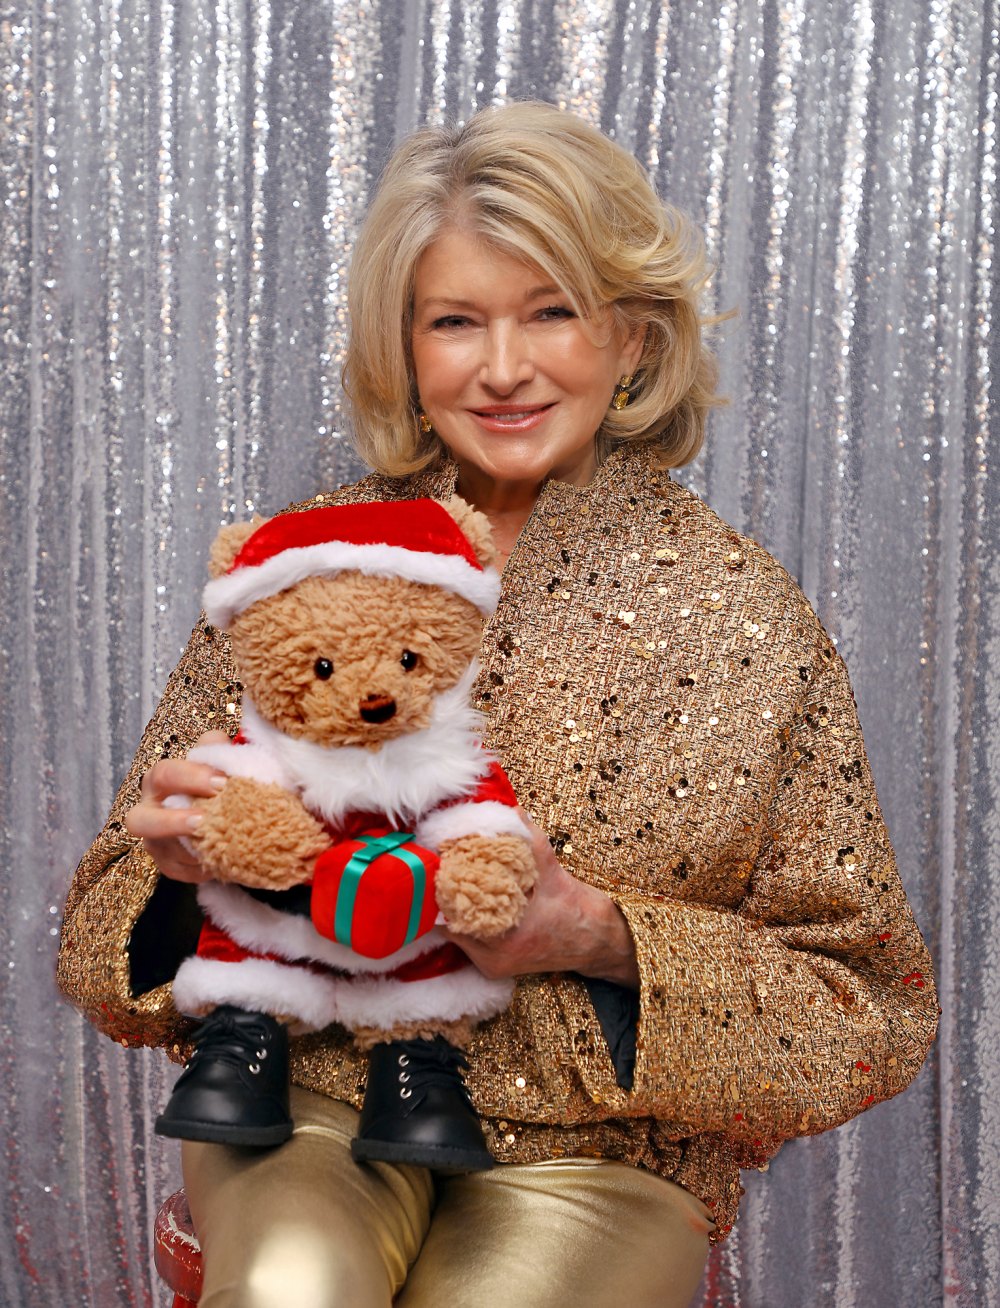 Martha Stewart Shows Off Her ‘Beautiful’ Nightgown in Sultry Mirror ...